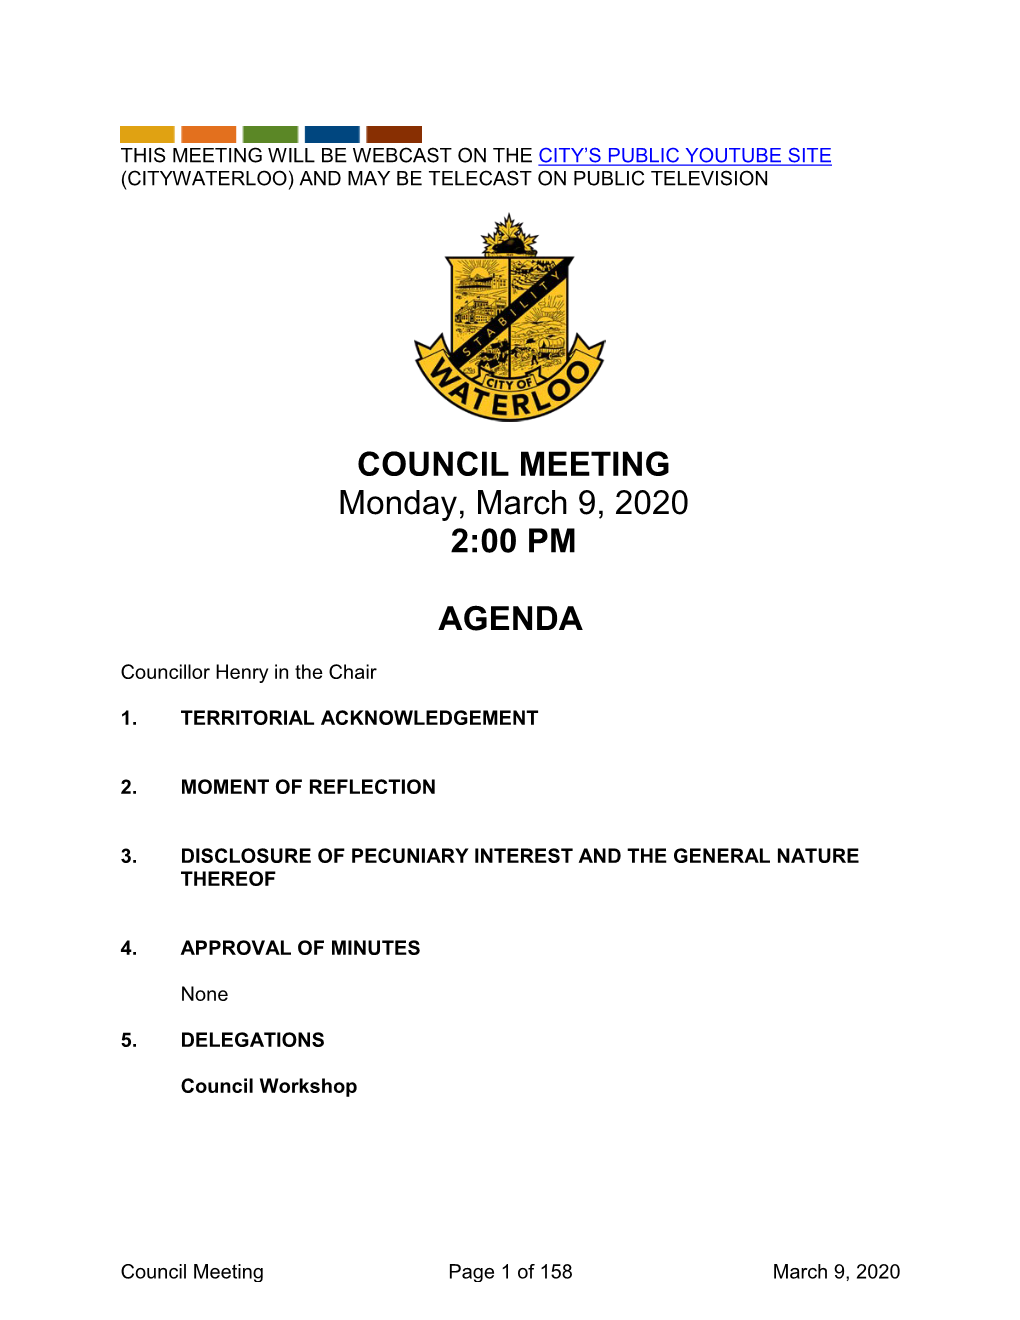 March 9, 2020 Council Meeting Packet